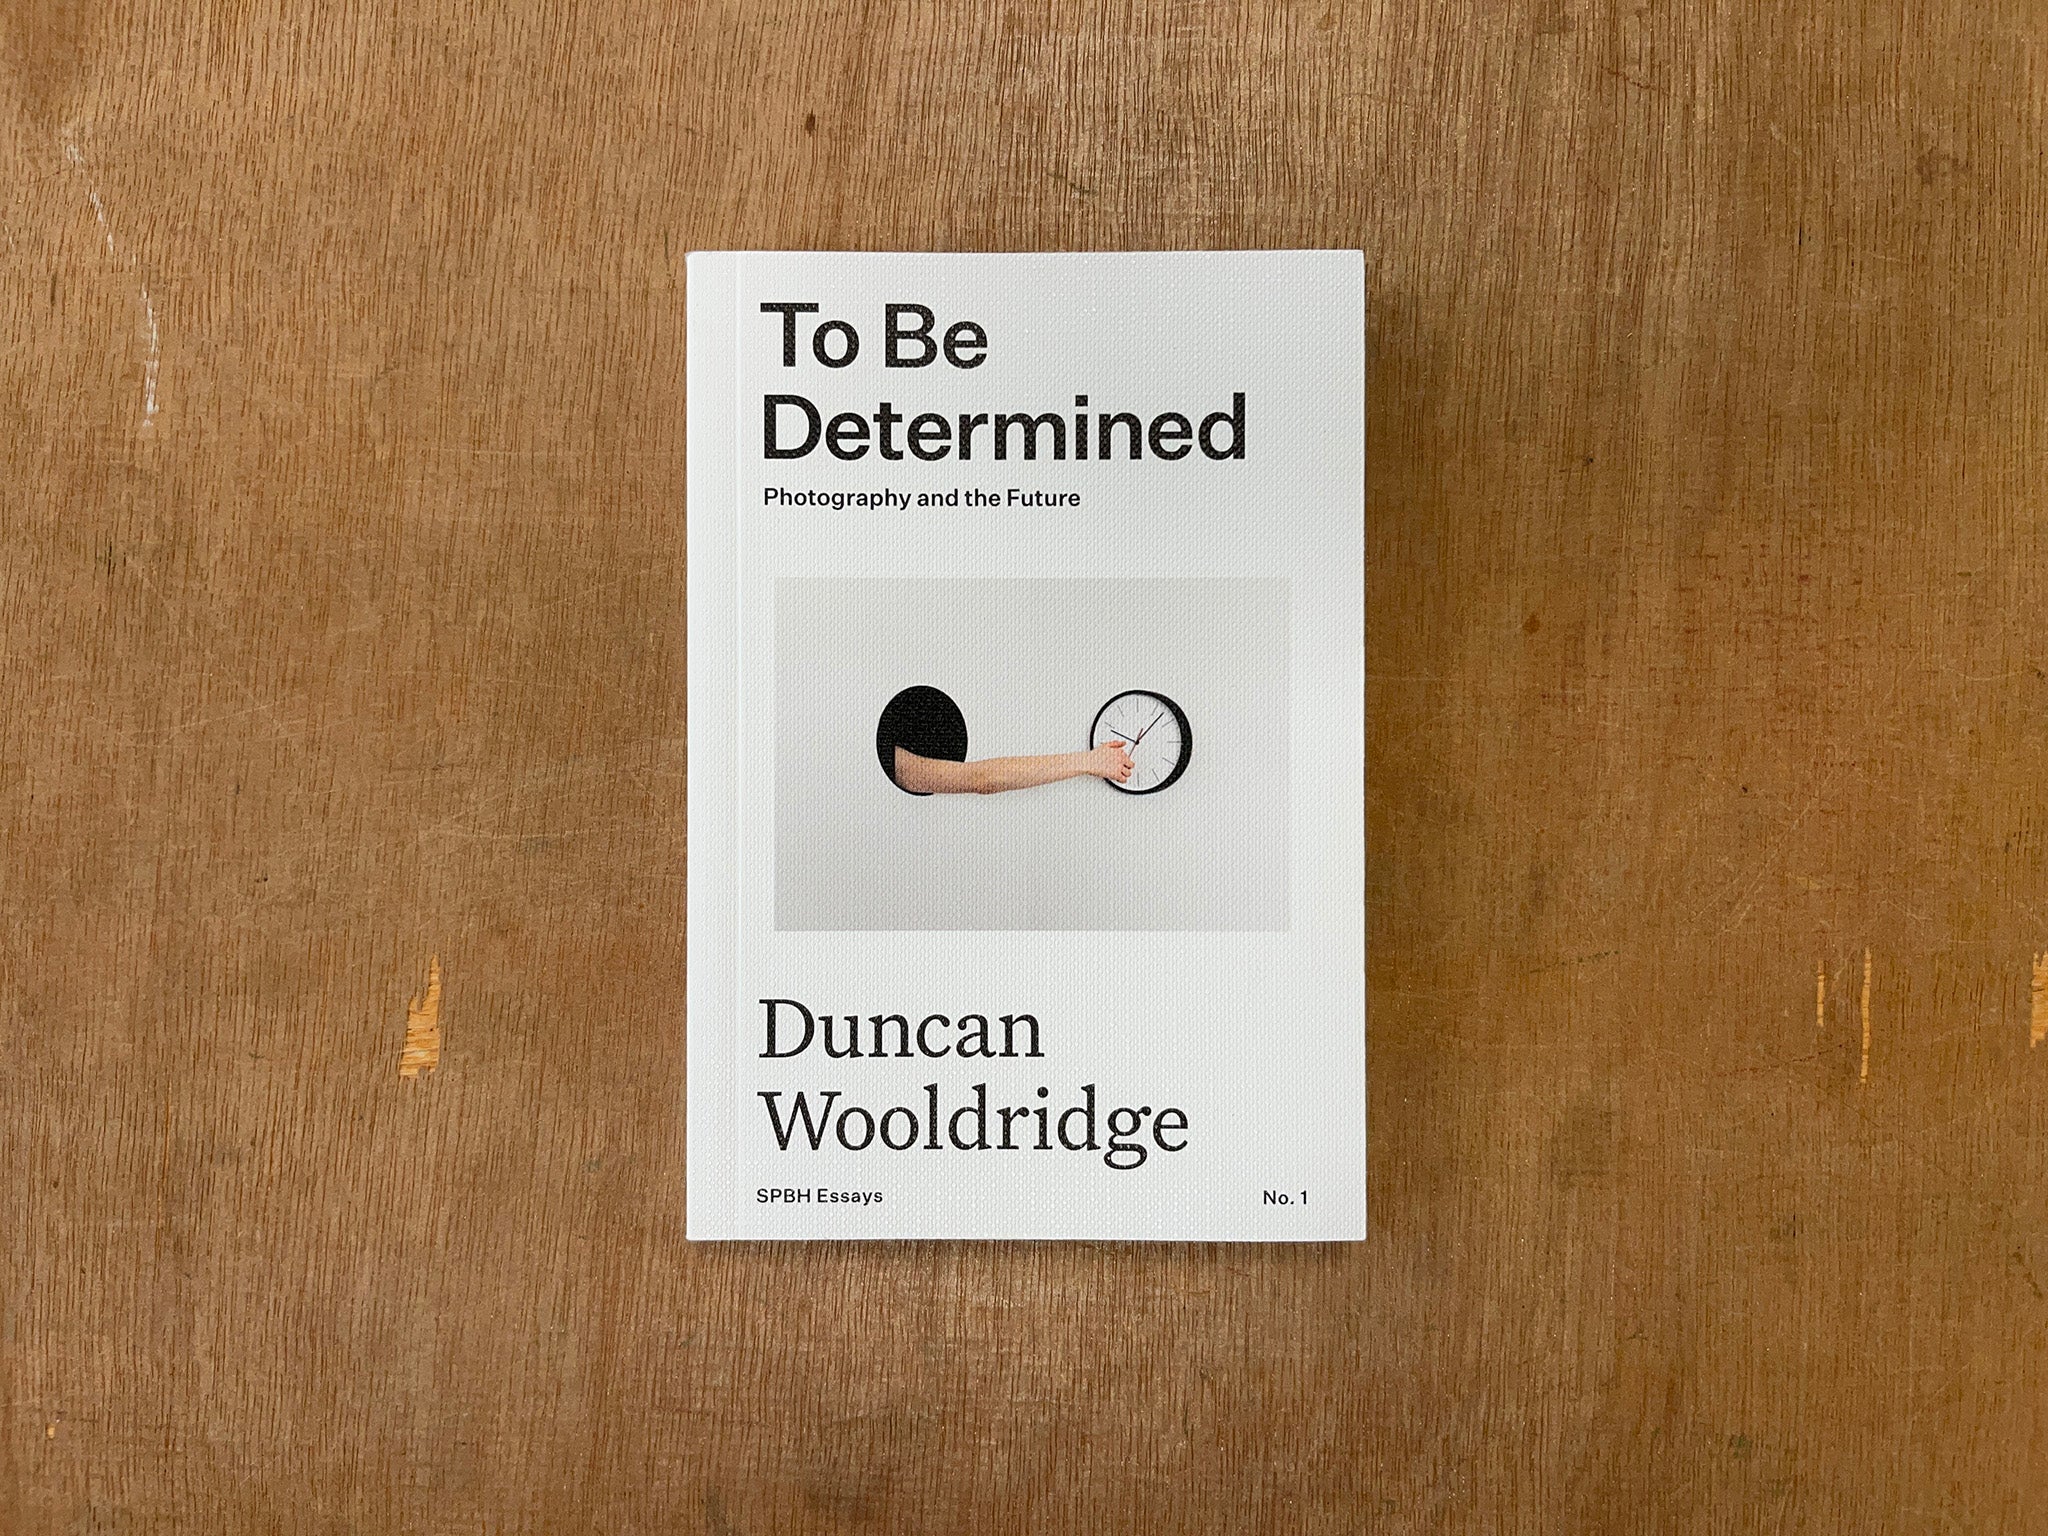 TO BE DETERMINED: PHOTOGRAPHY AND THE FUTURE by Duncan Wooldridge